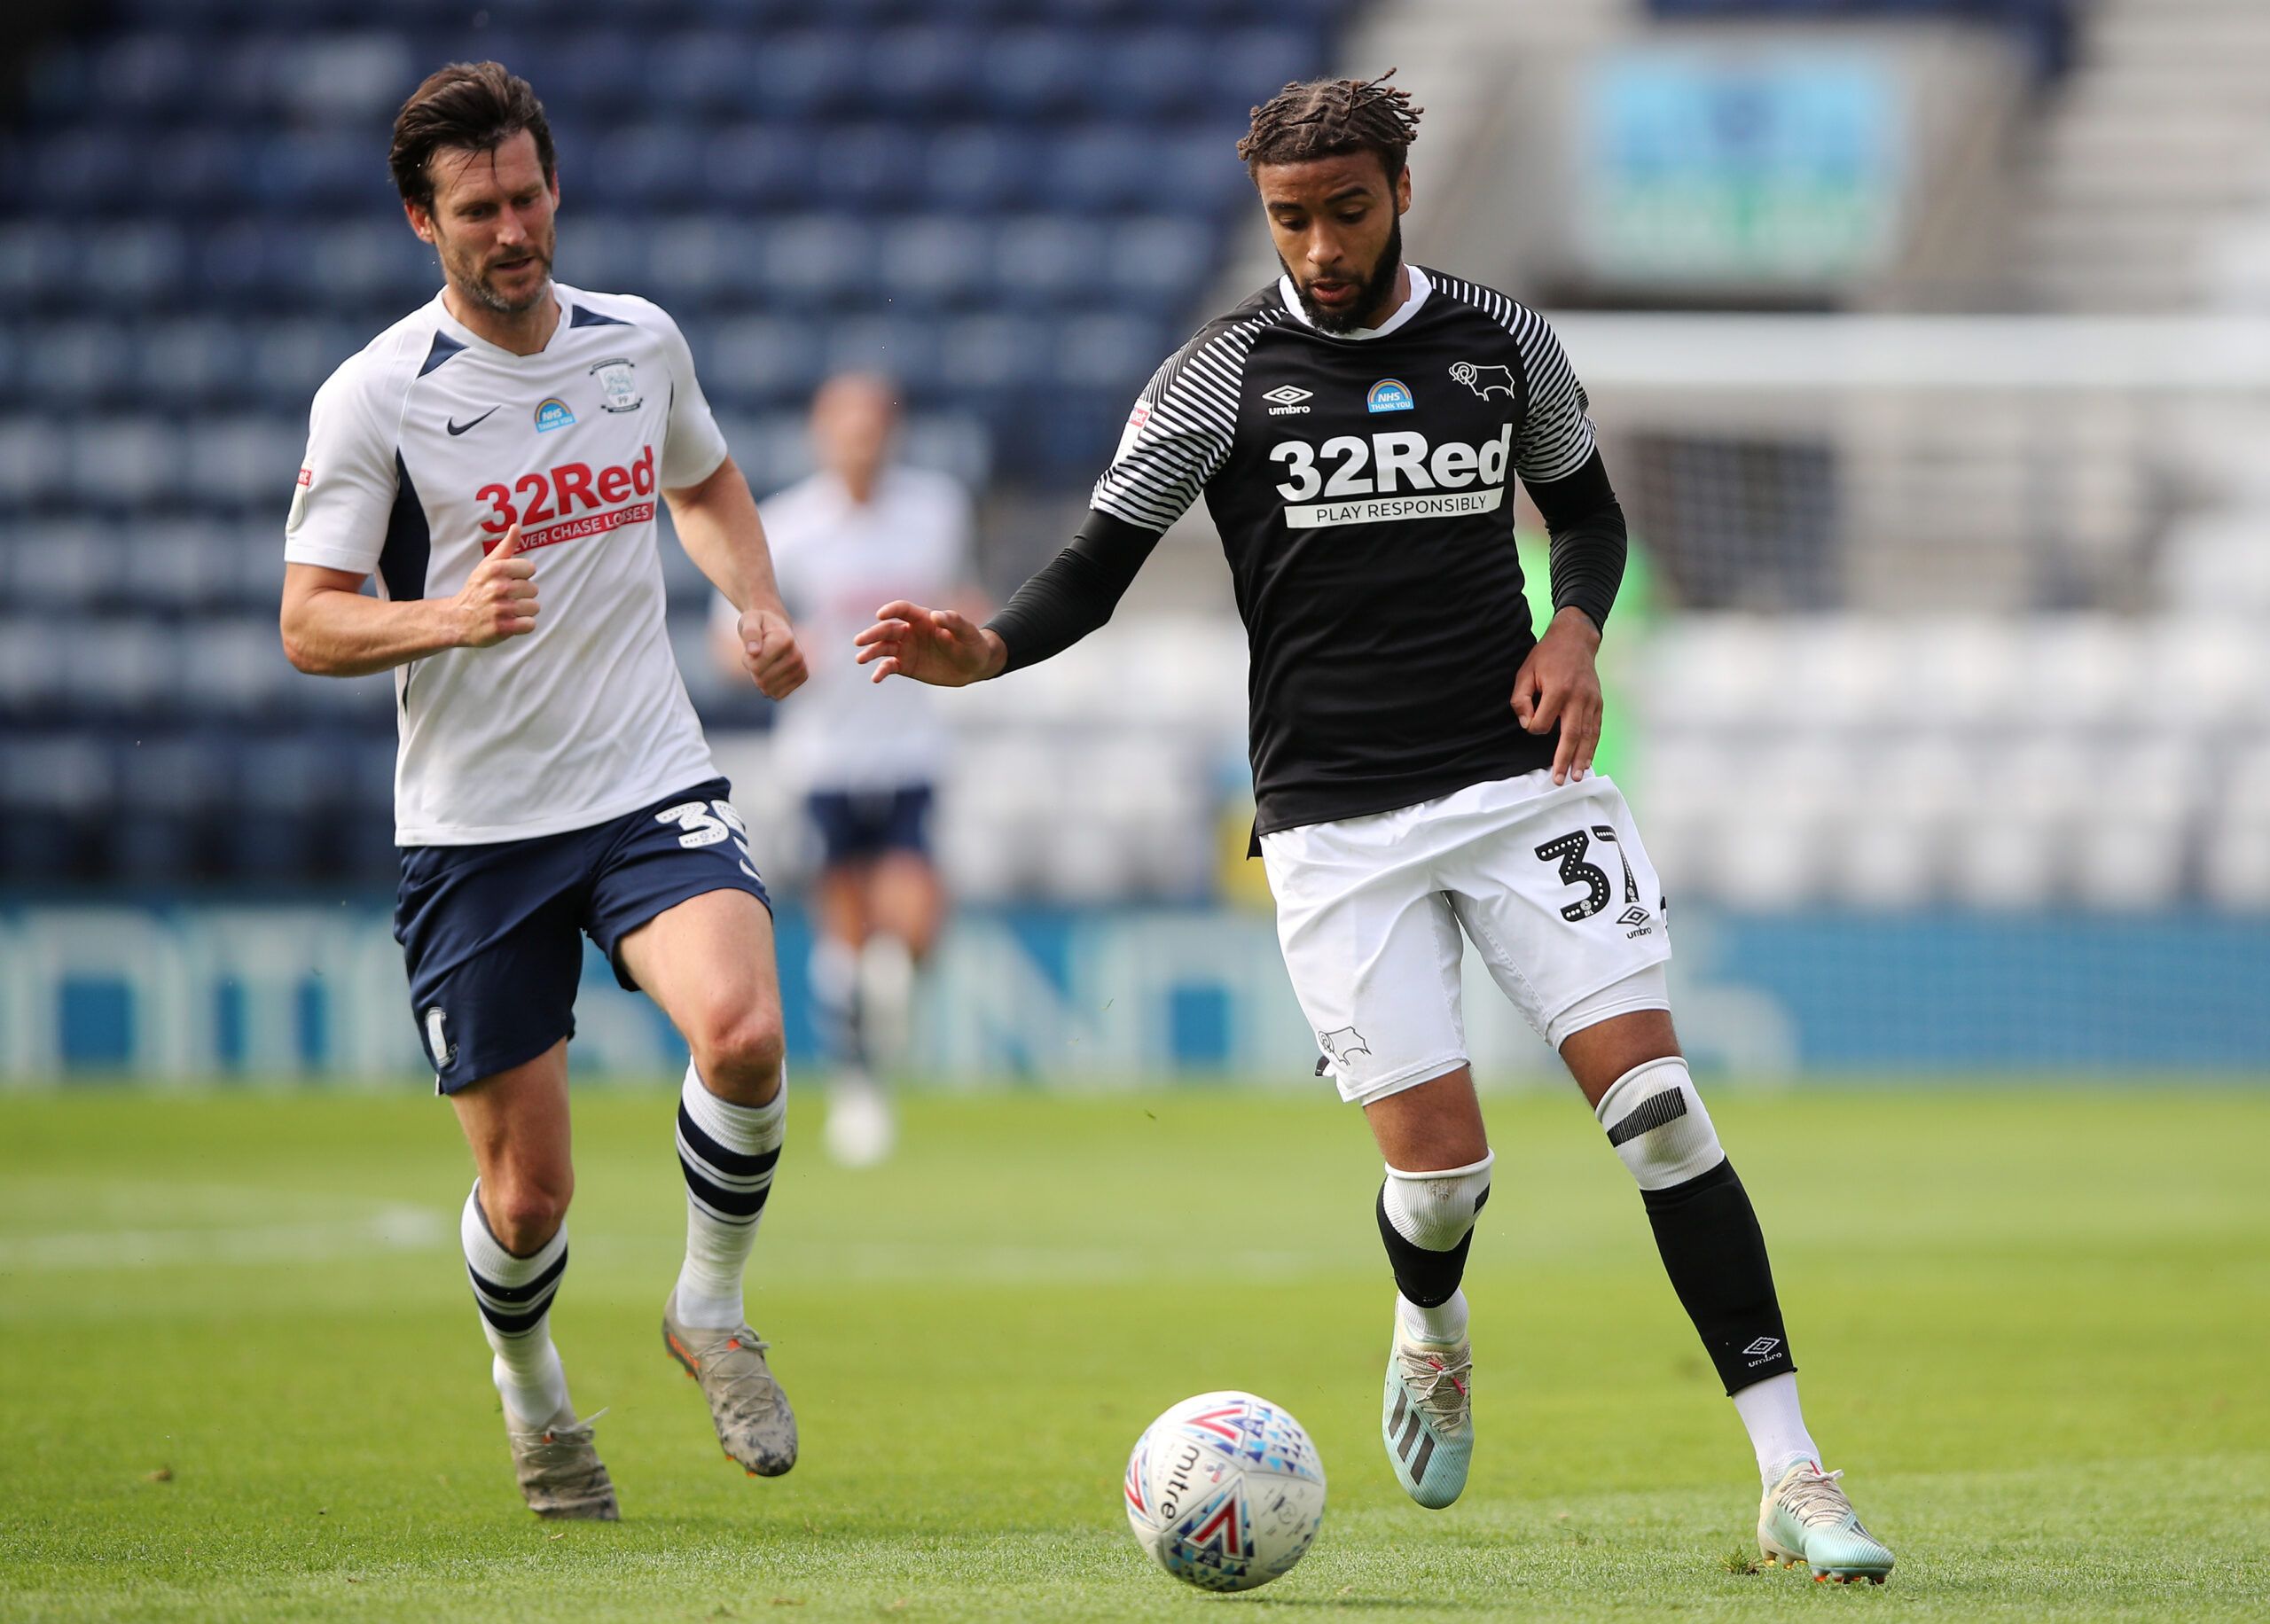 Soccer Football - Championship - Preston North End v Derby County - Deepdale, Preston, Britain - July 1, 2020   Derby County's Jayden Bogle in action with Preston North End's David Nugent, as play resumes behind closed doors following the outbreak of the coronavirus disease (COVID-19)   Action Images/Molly Darlington    EDITORIAL USE ONLY. No use with unauthorized audio, video, data, fixture lists, club/league logos or 